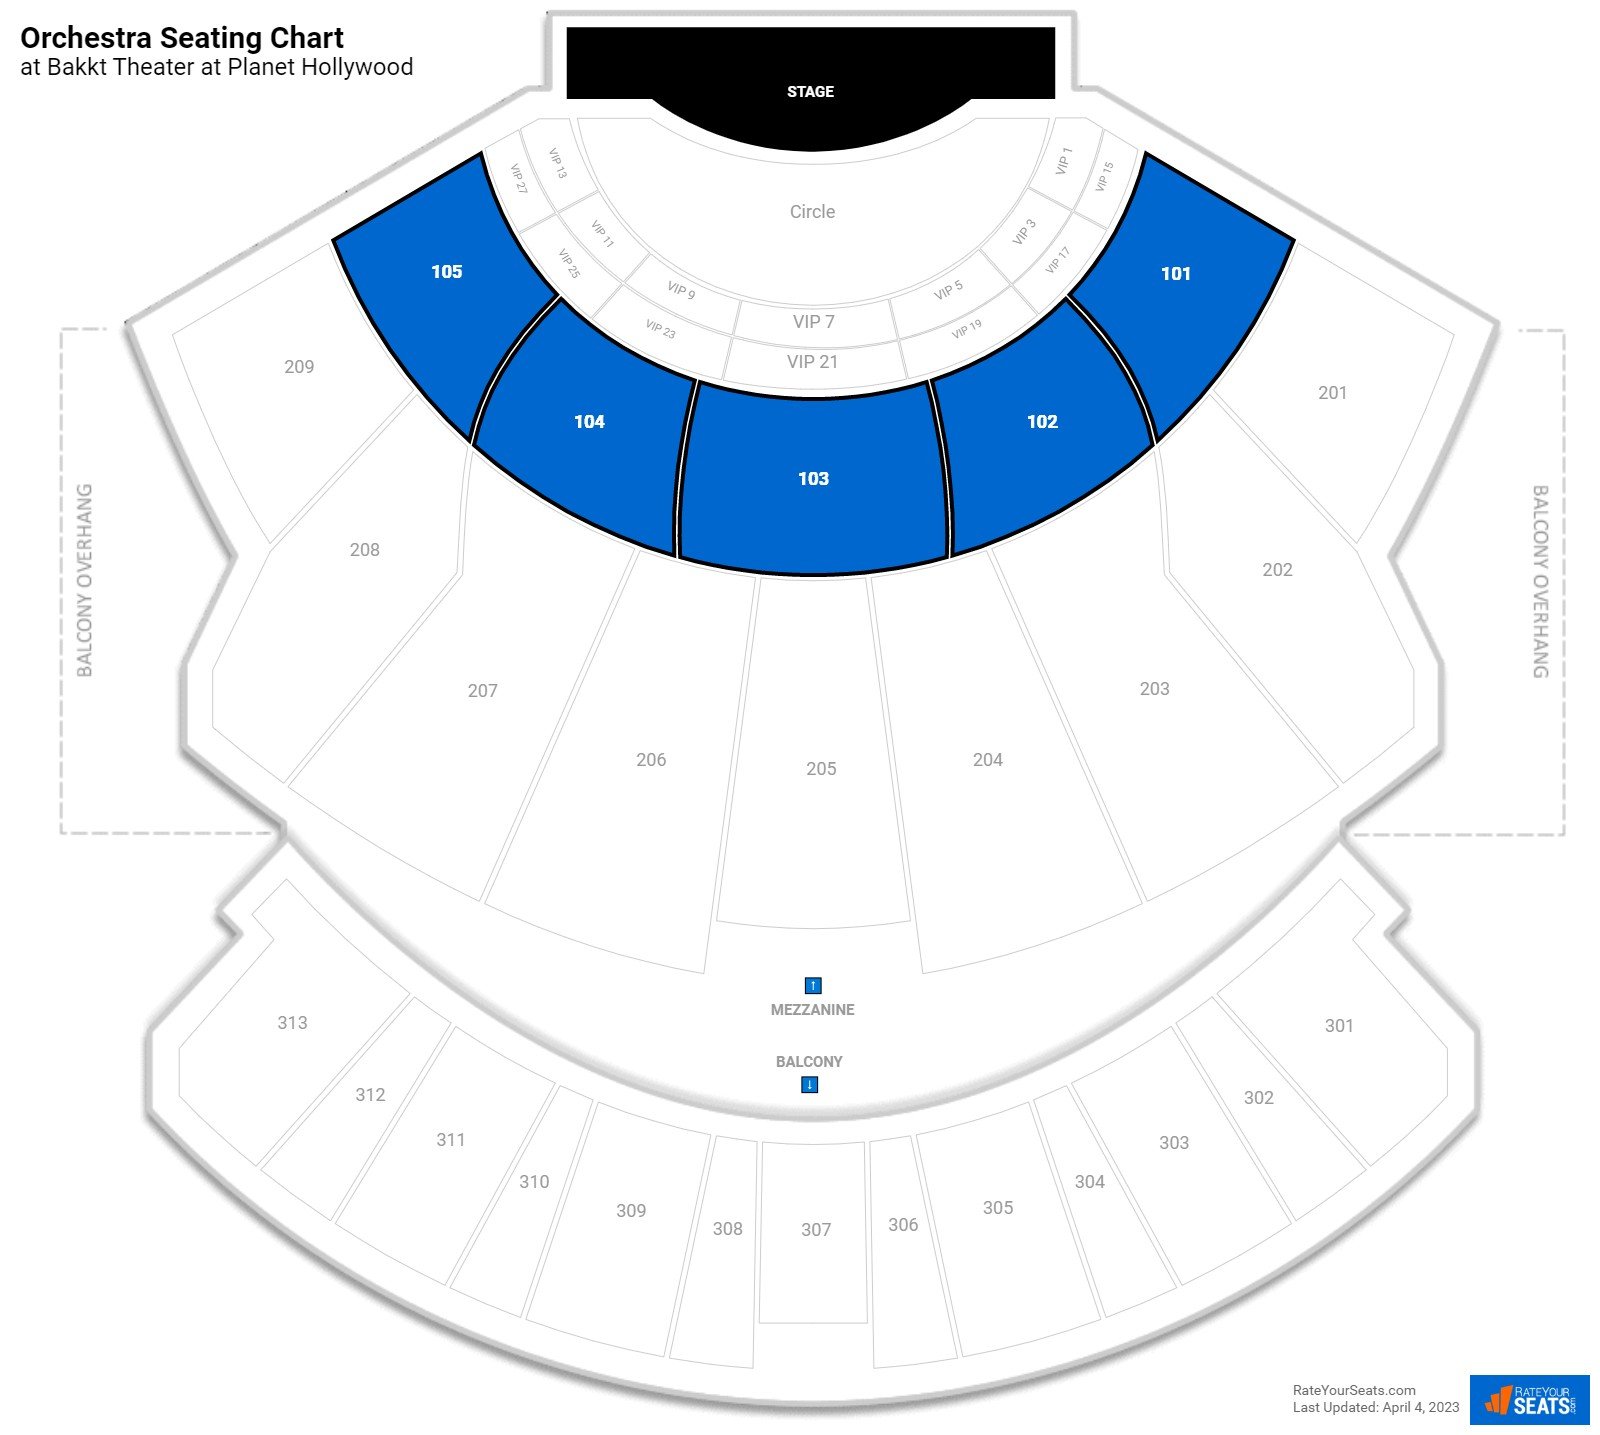 Zappos Theater Seating Map